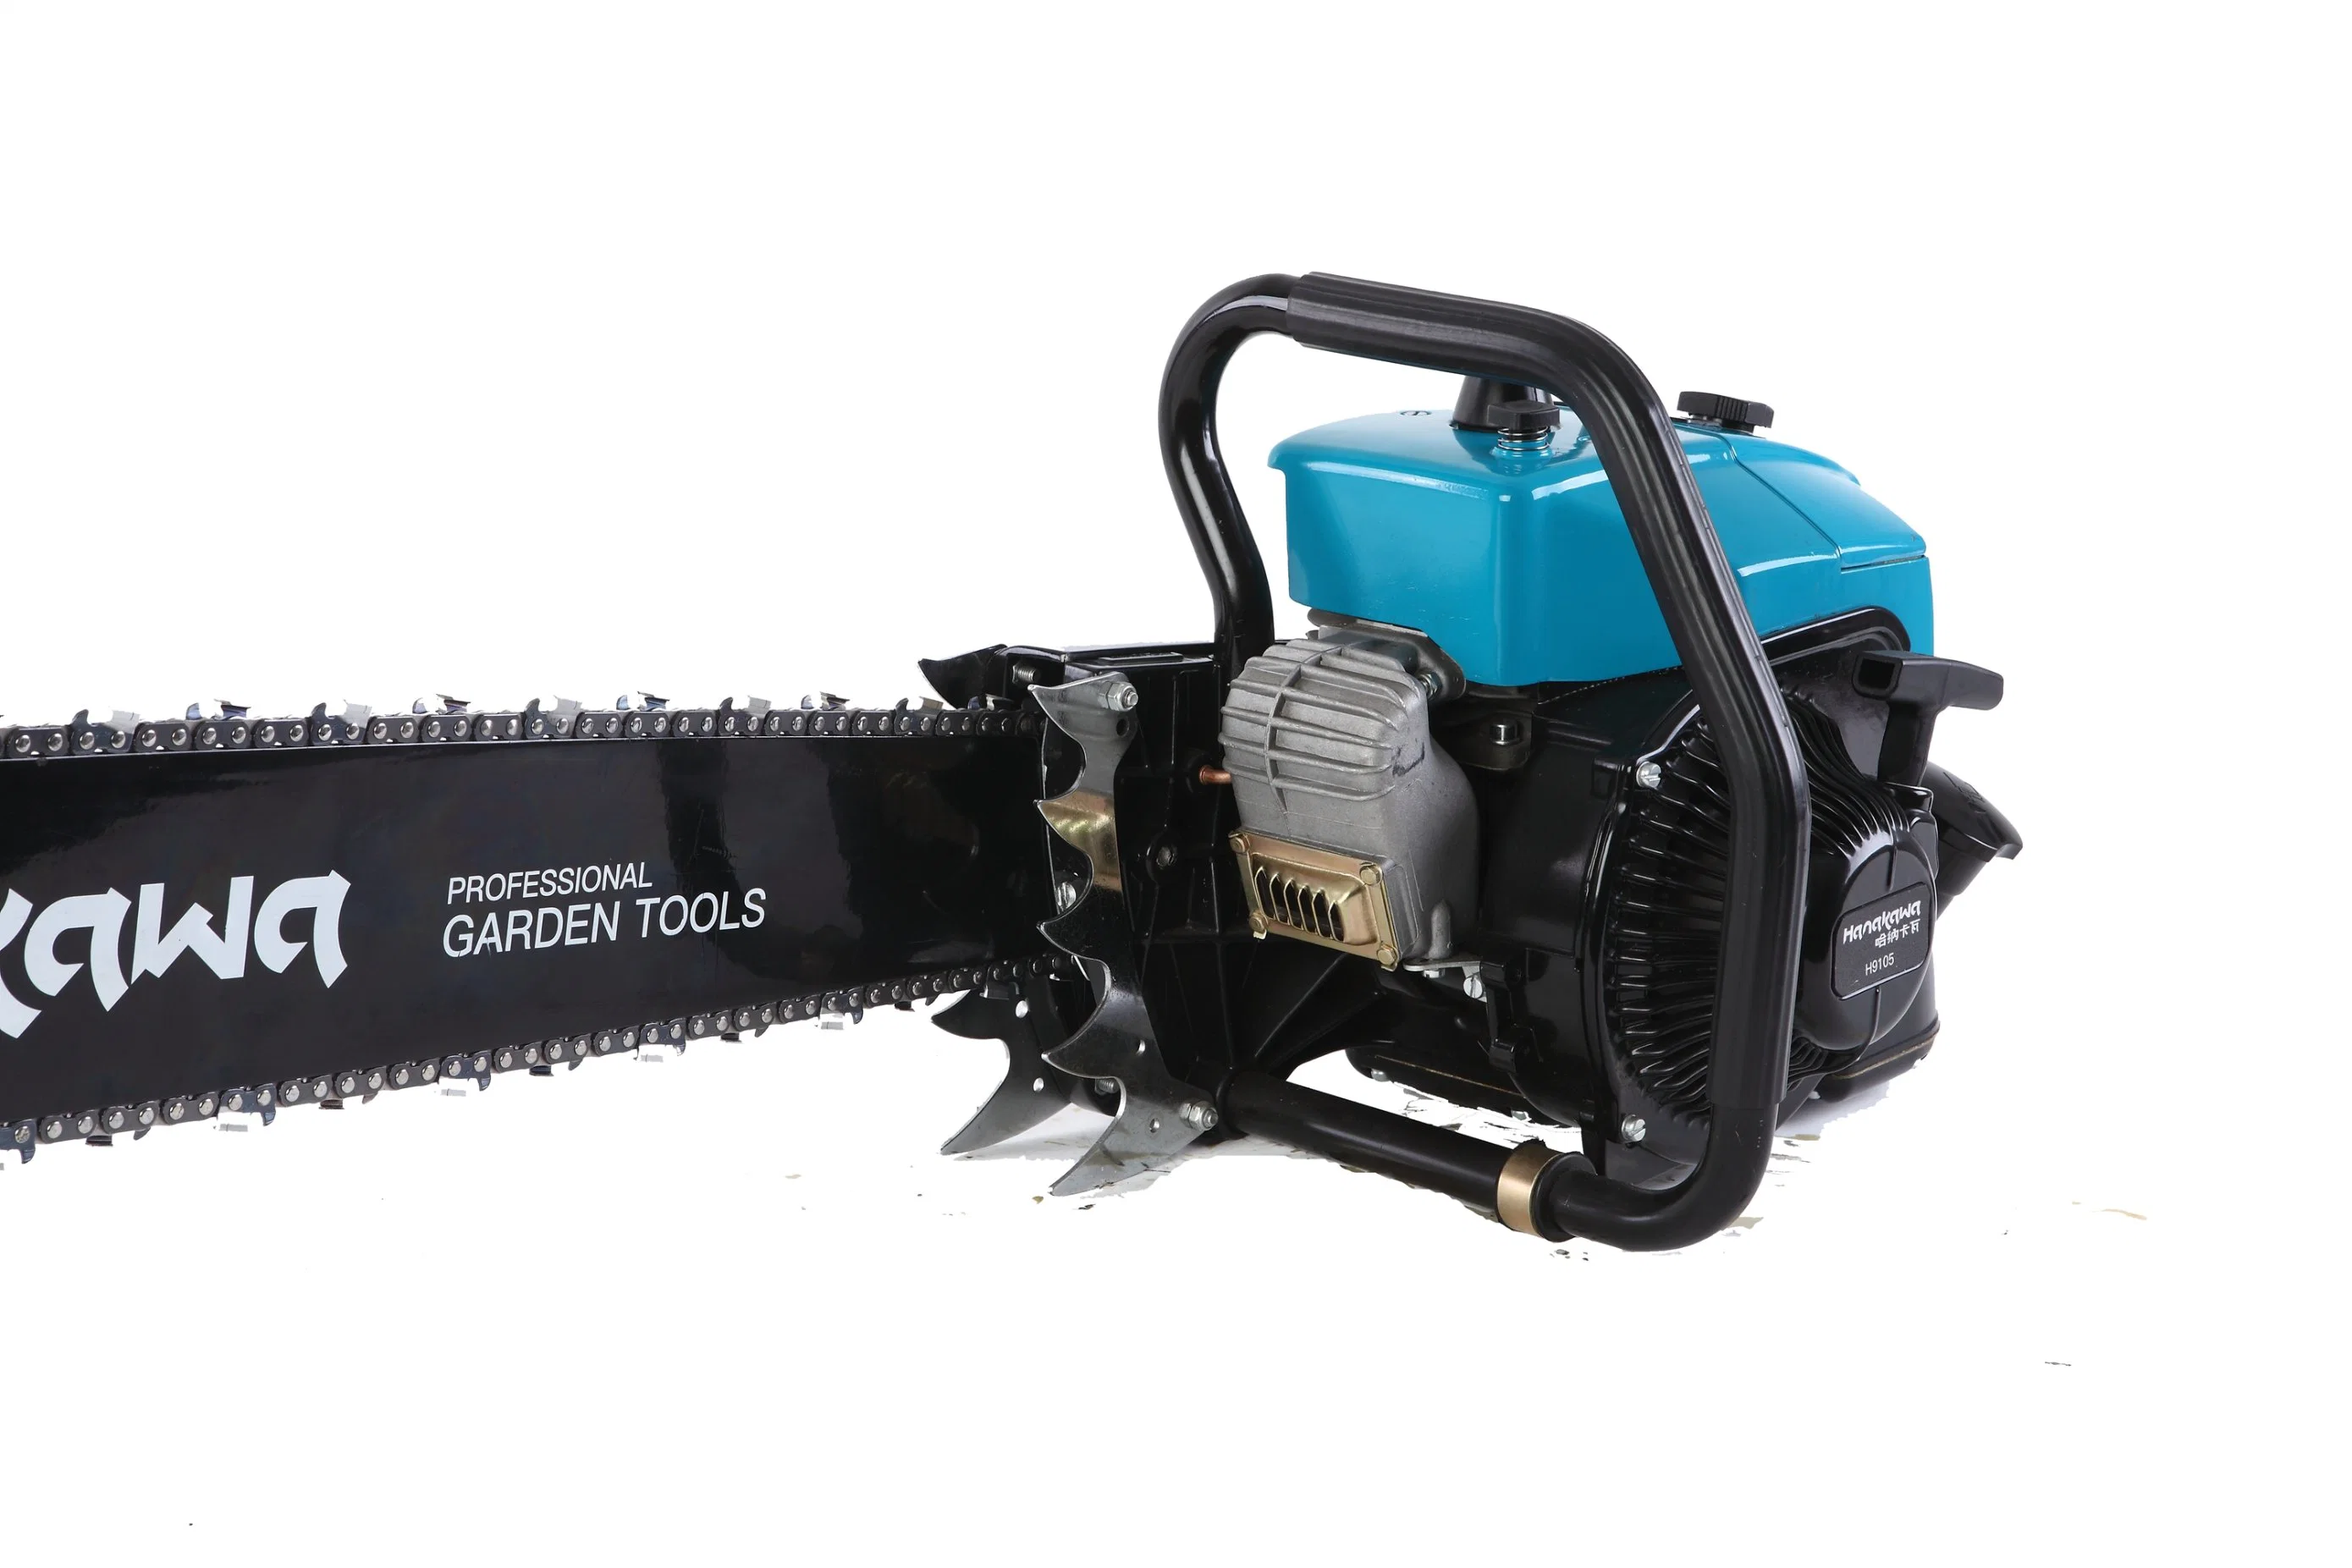 Hanakawa H9105 (070) 105.7cc 36inch Power Chain Saw 2-Cycle Handed Petrol Chainsaws Gasoline Chain Saws Garden Tool for Cutting Wood Outdoor Home Farm Use